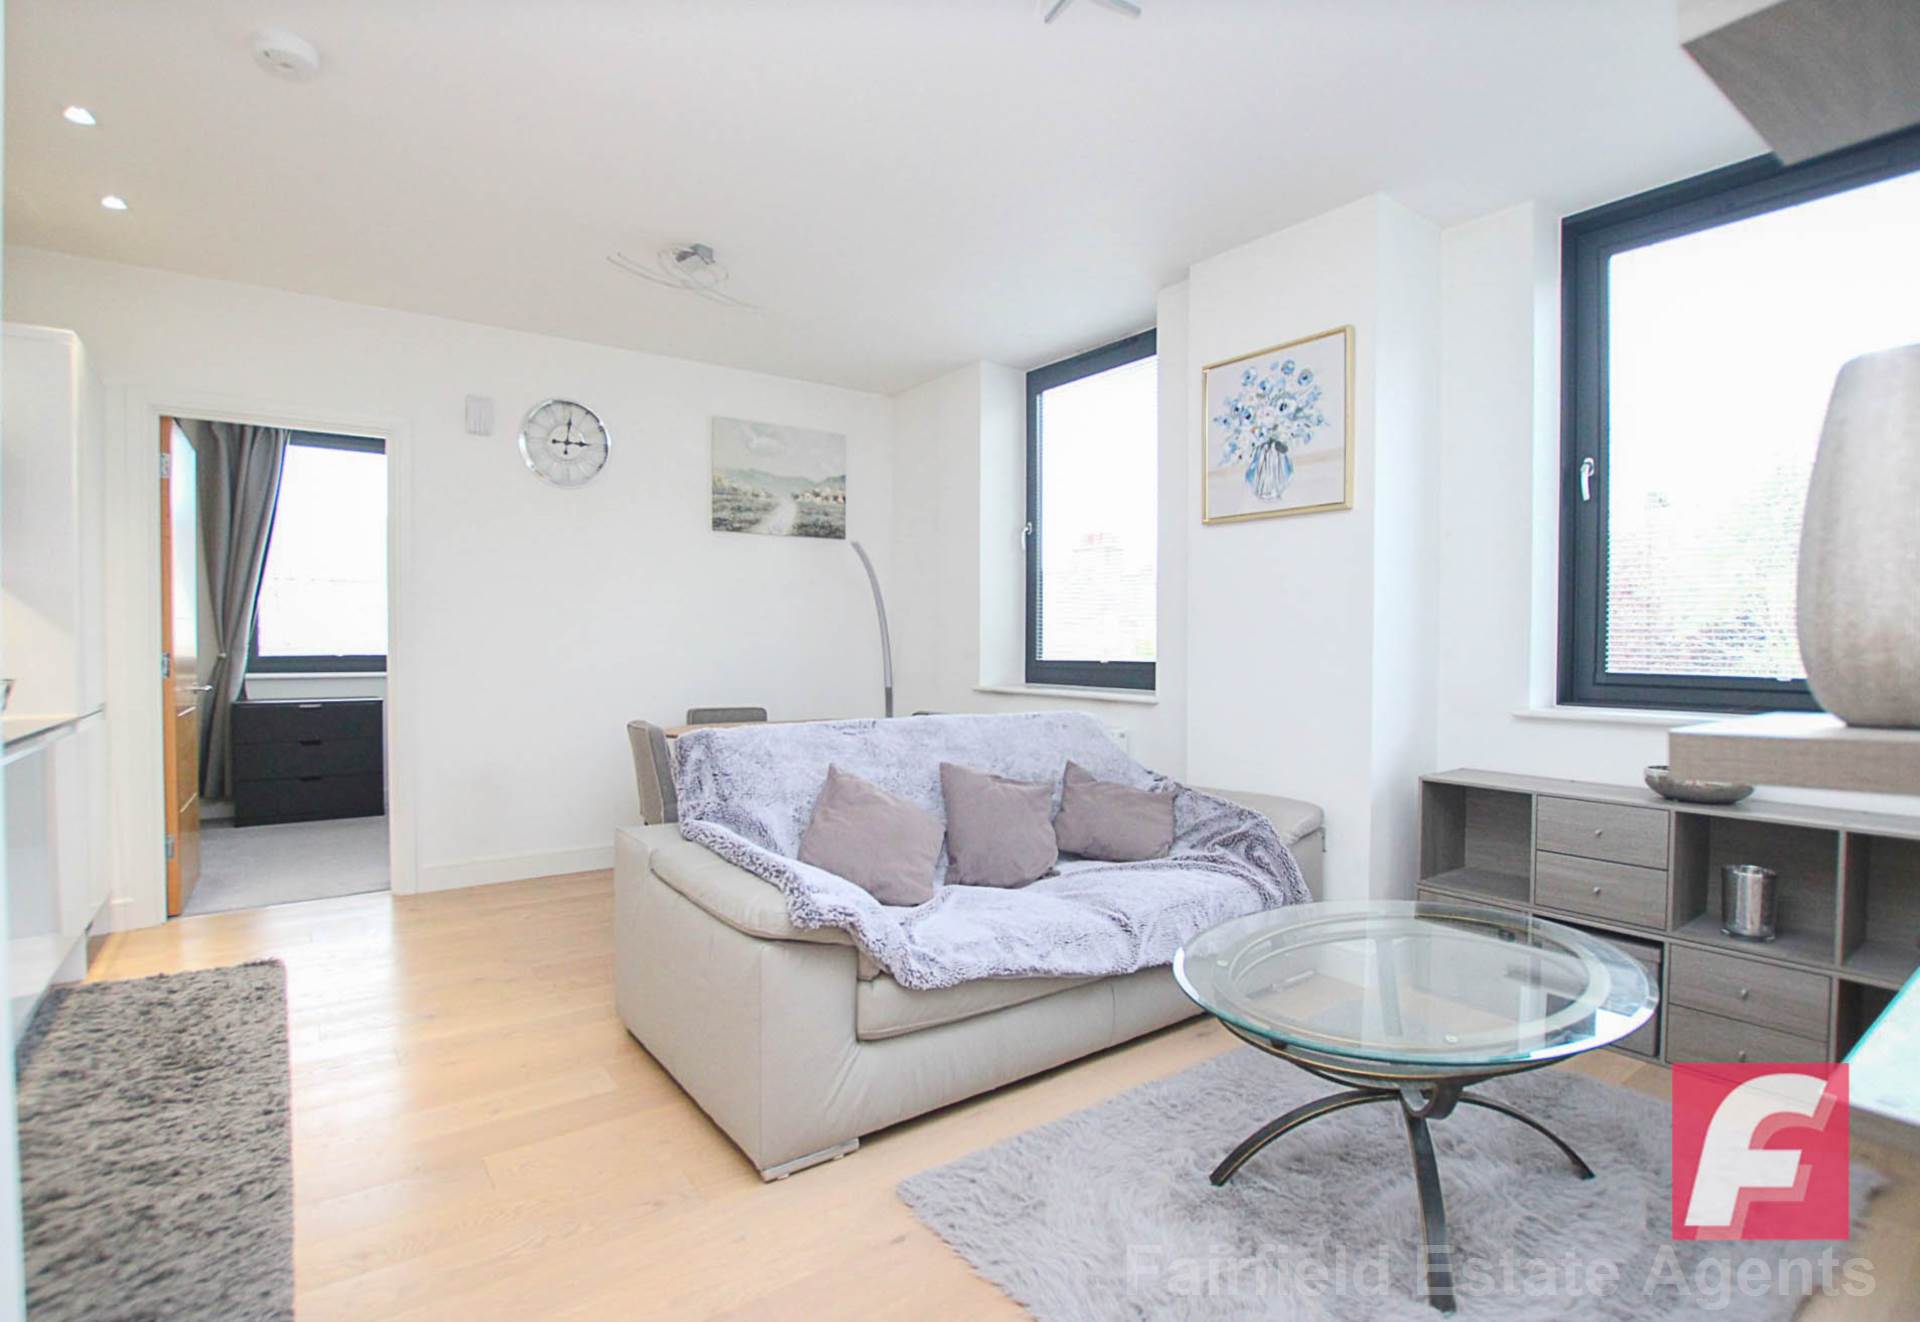 1 bed Flat for rent in Bushey. From Fairfield Estate Agents - Watford Branch